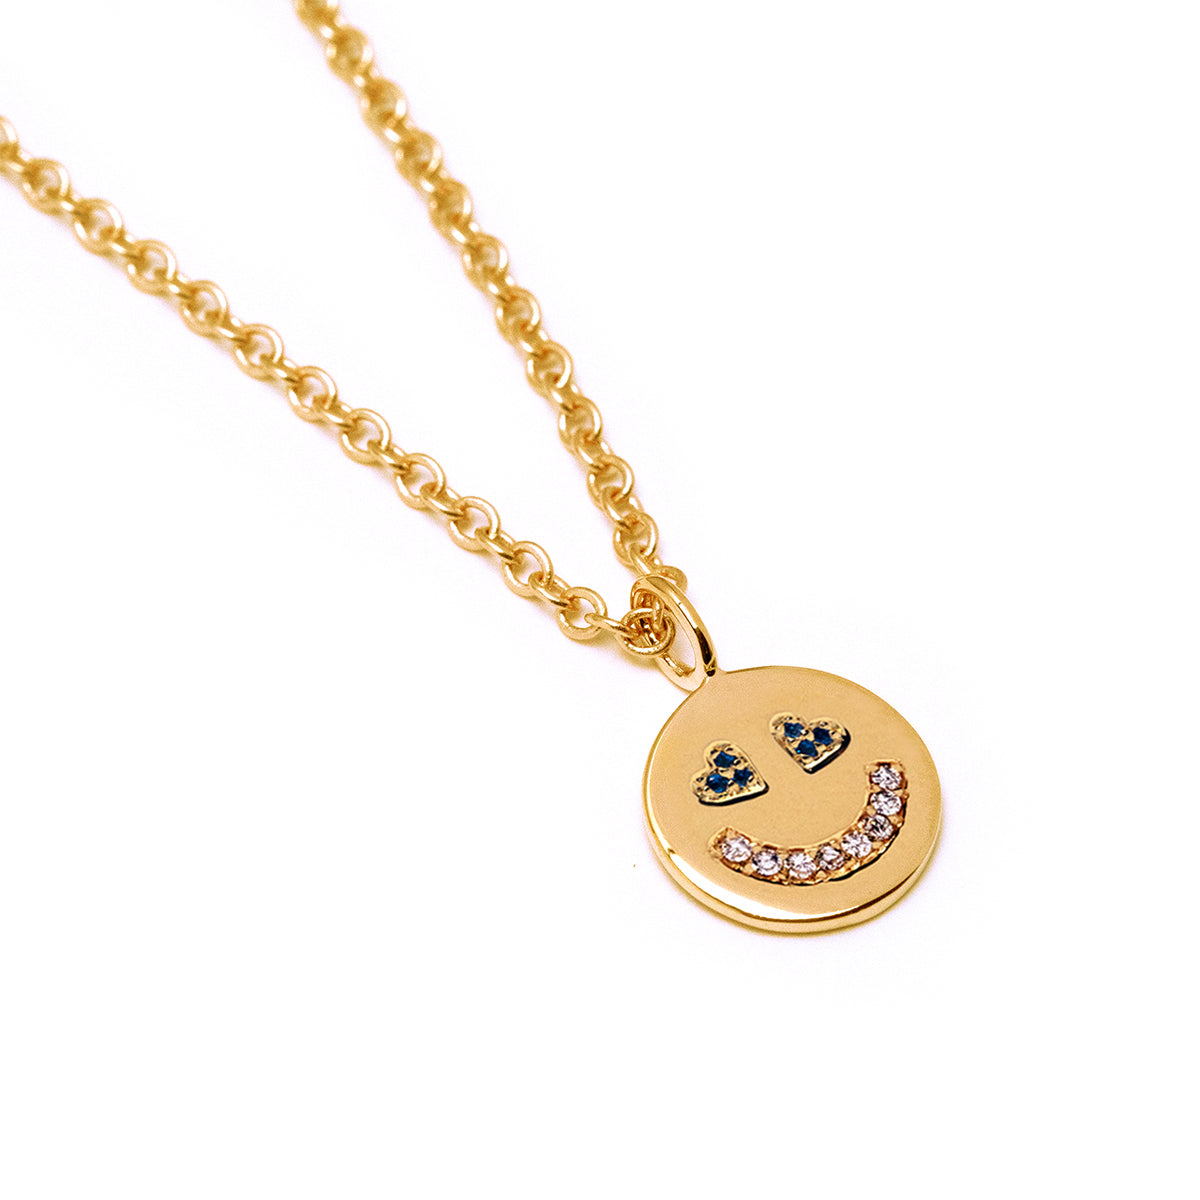 In Love Face Necklace (Blue)